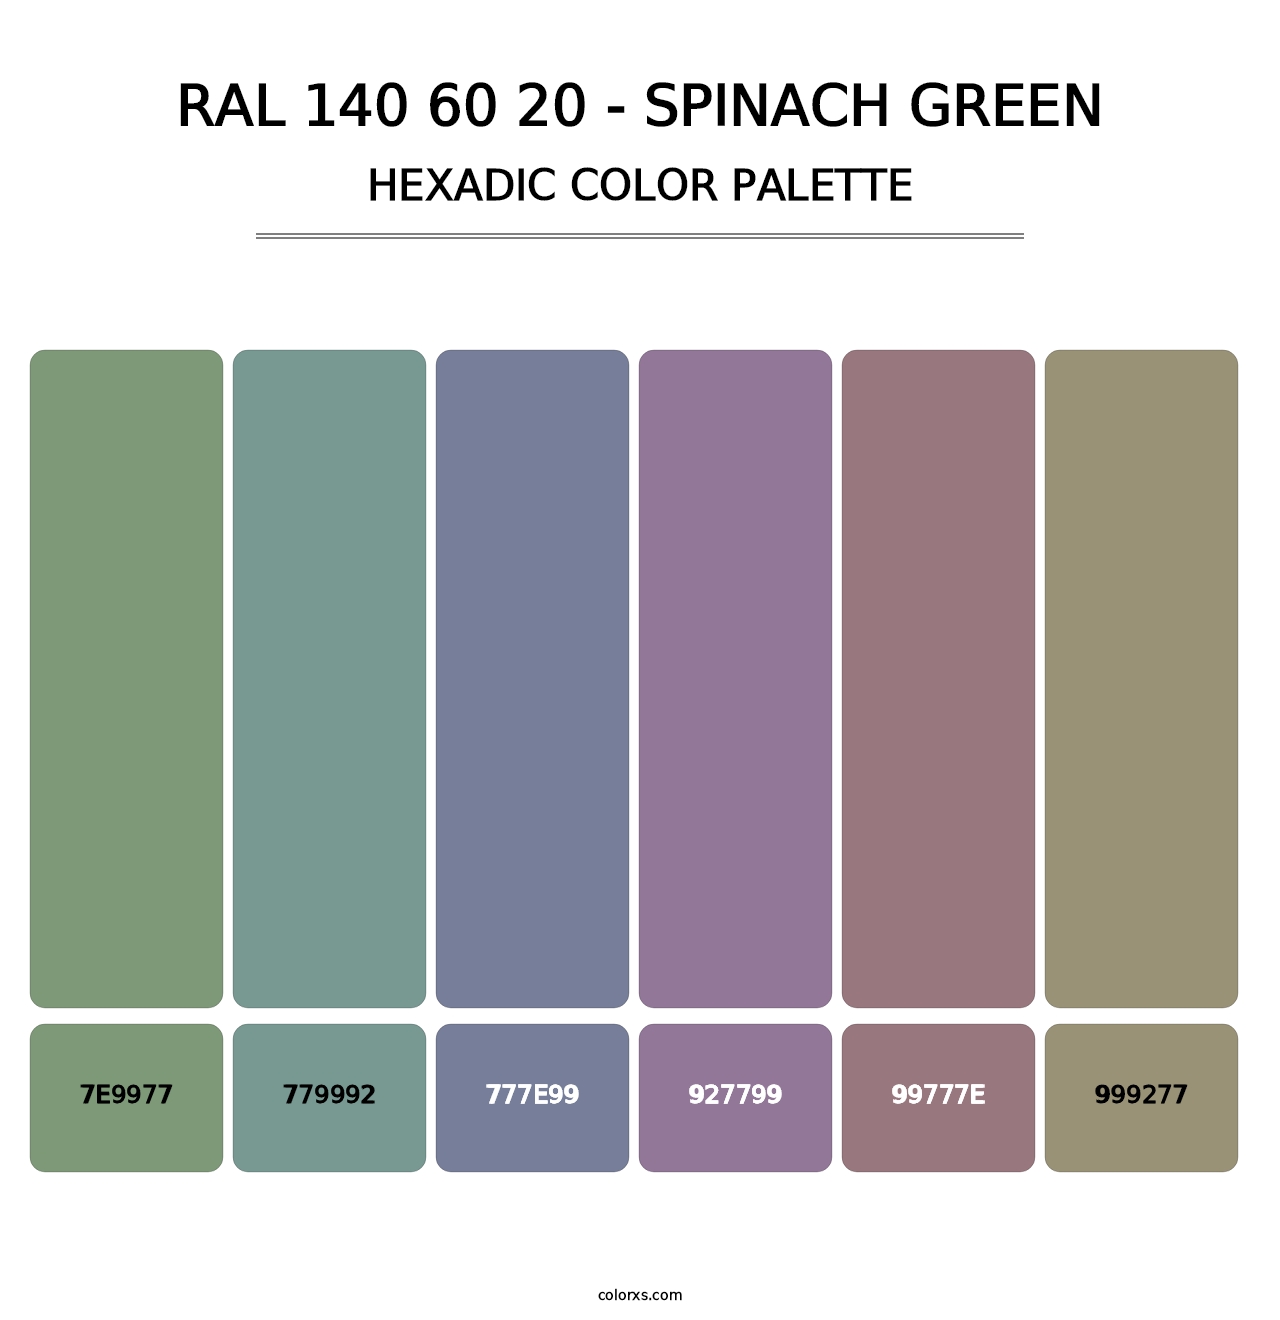 RAL 140 60 20 - Spinach Green - Hexadic Color Palette